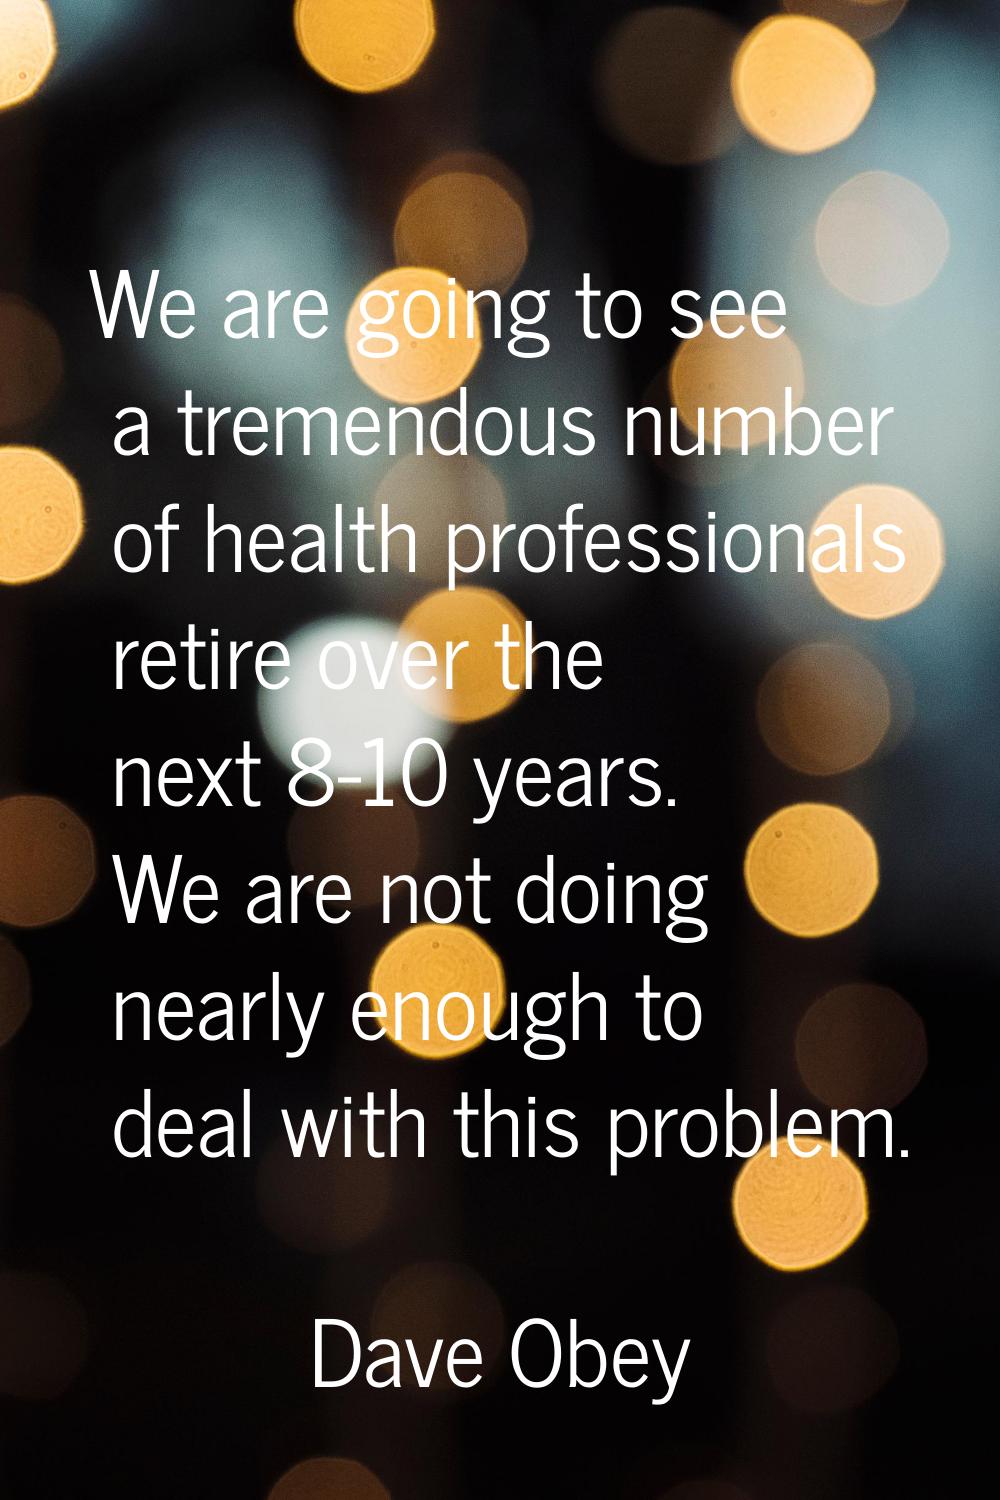 We are going to see a tremendous number of health professionals retire over the next 8-10 years. We